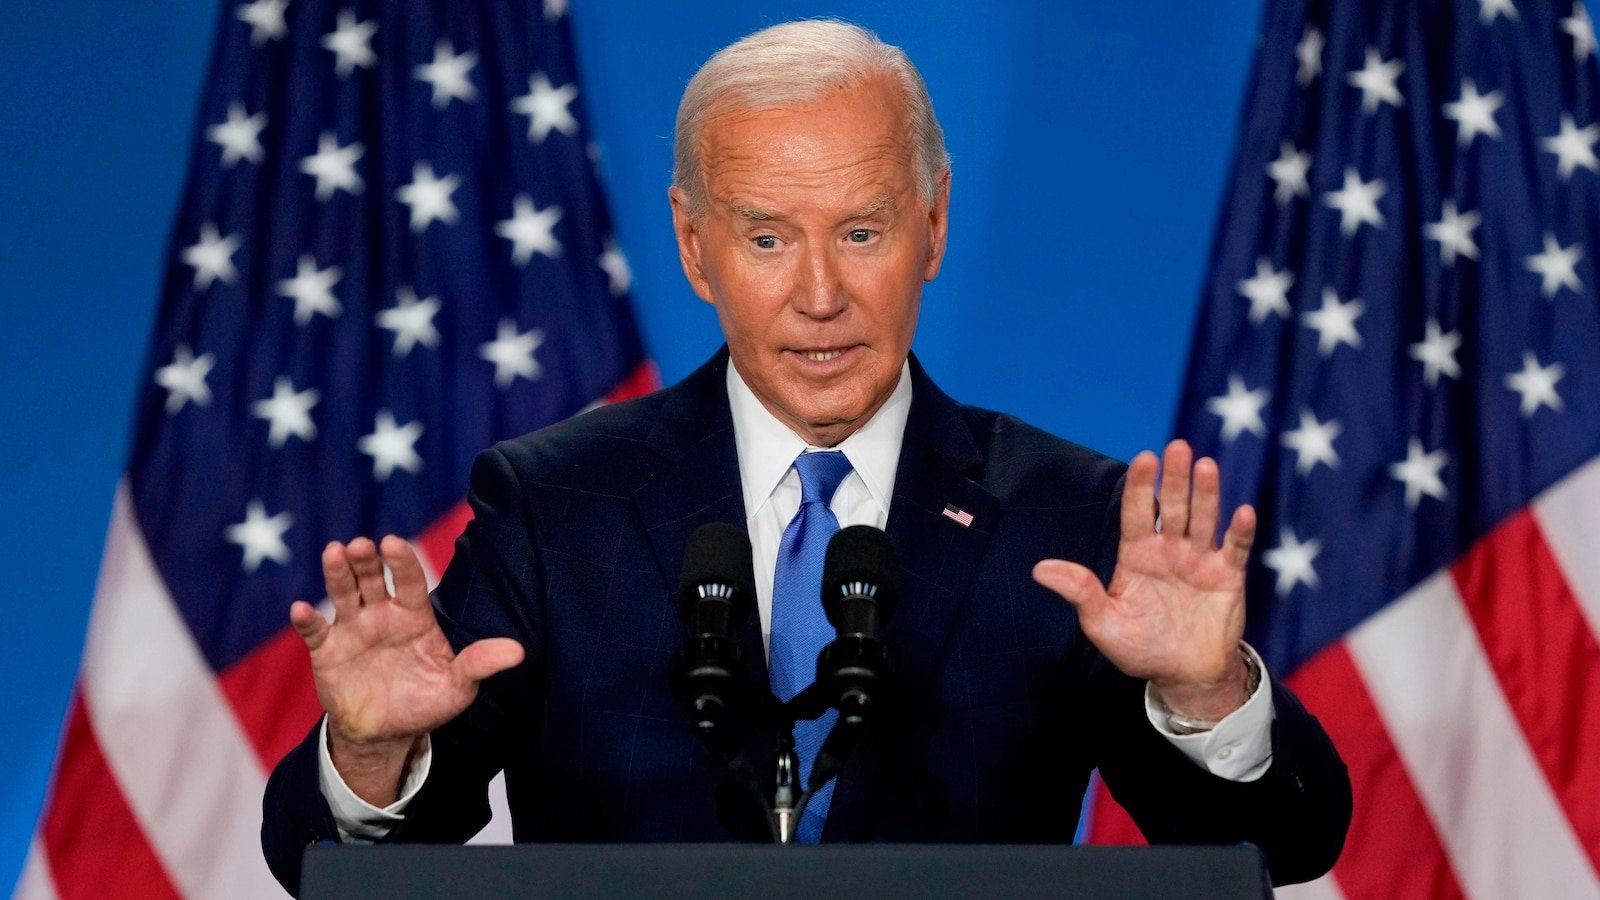 Democrats worry Biden press conference leaves them in 'purgatory': ANALYSIS